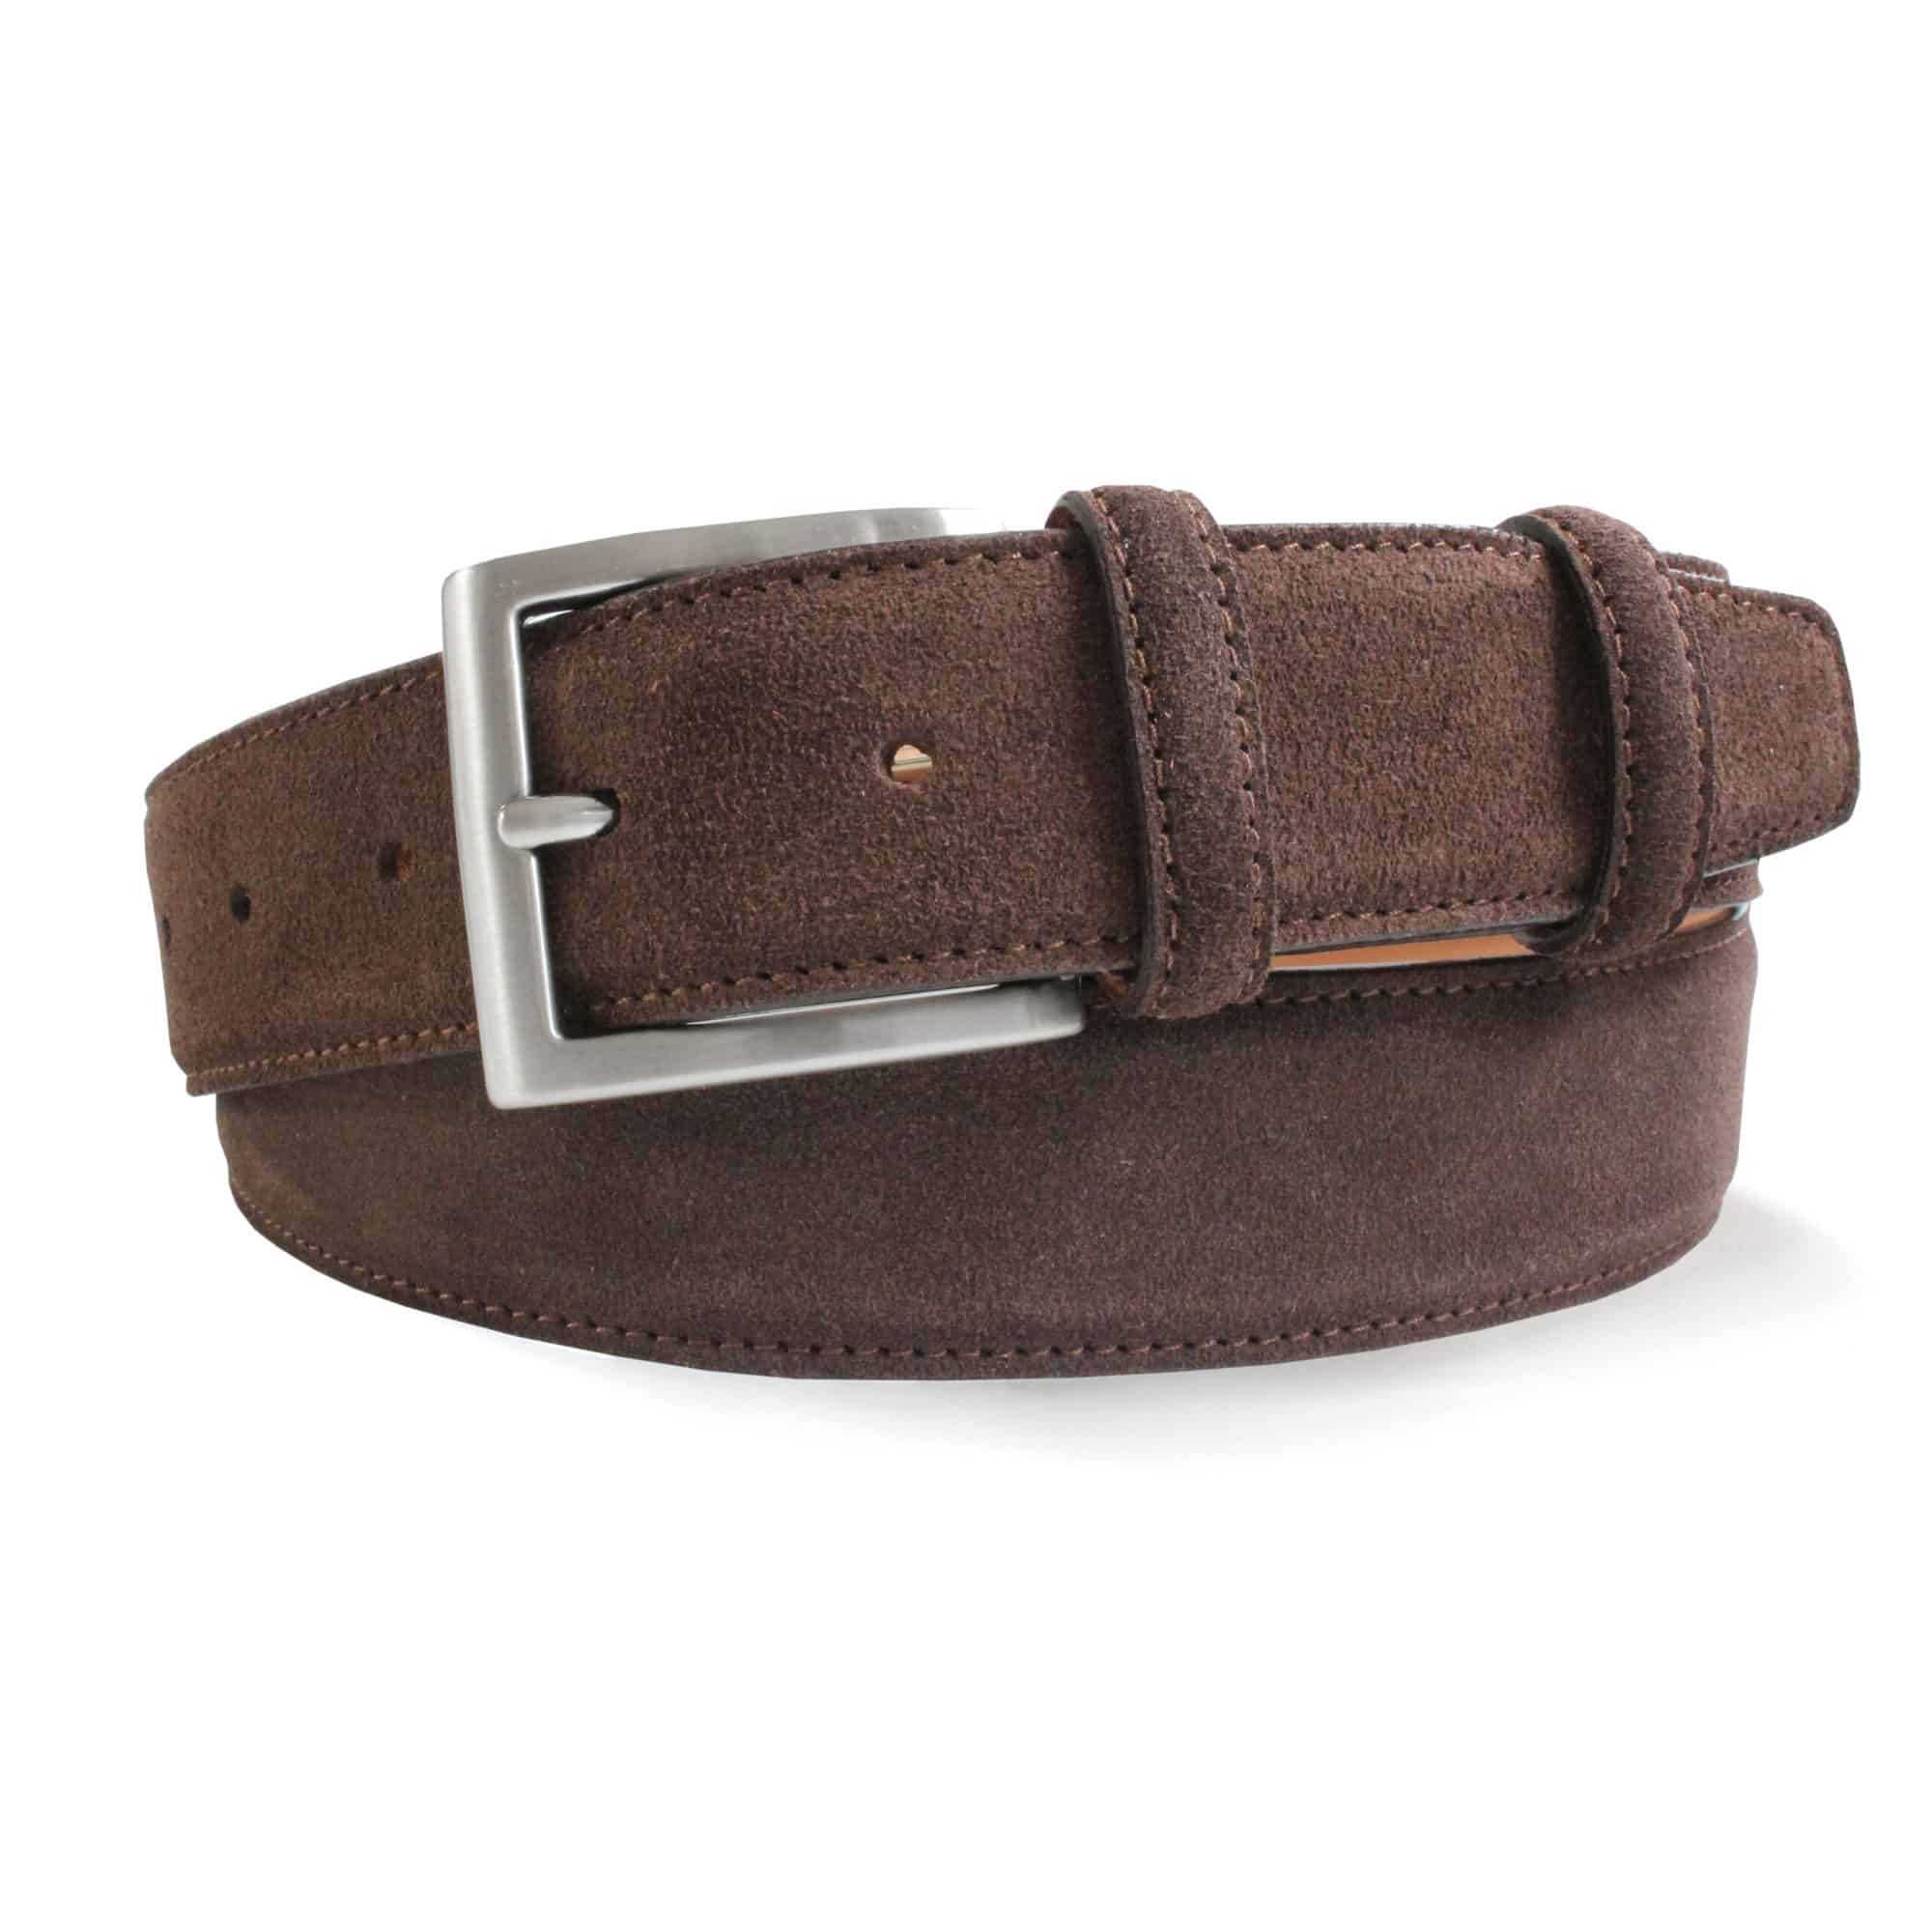 Brown Suede Belt by Smart Clothes York Yorkshire